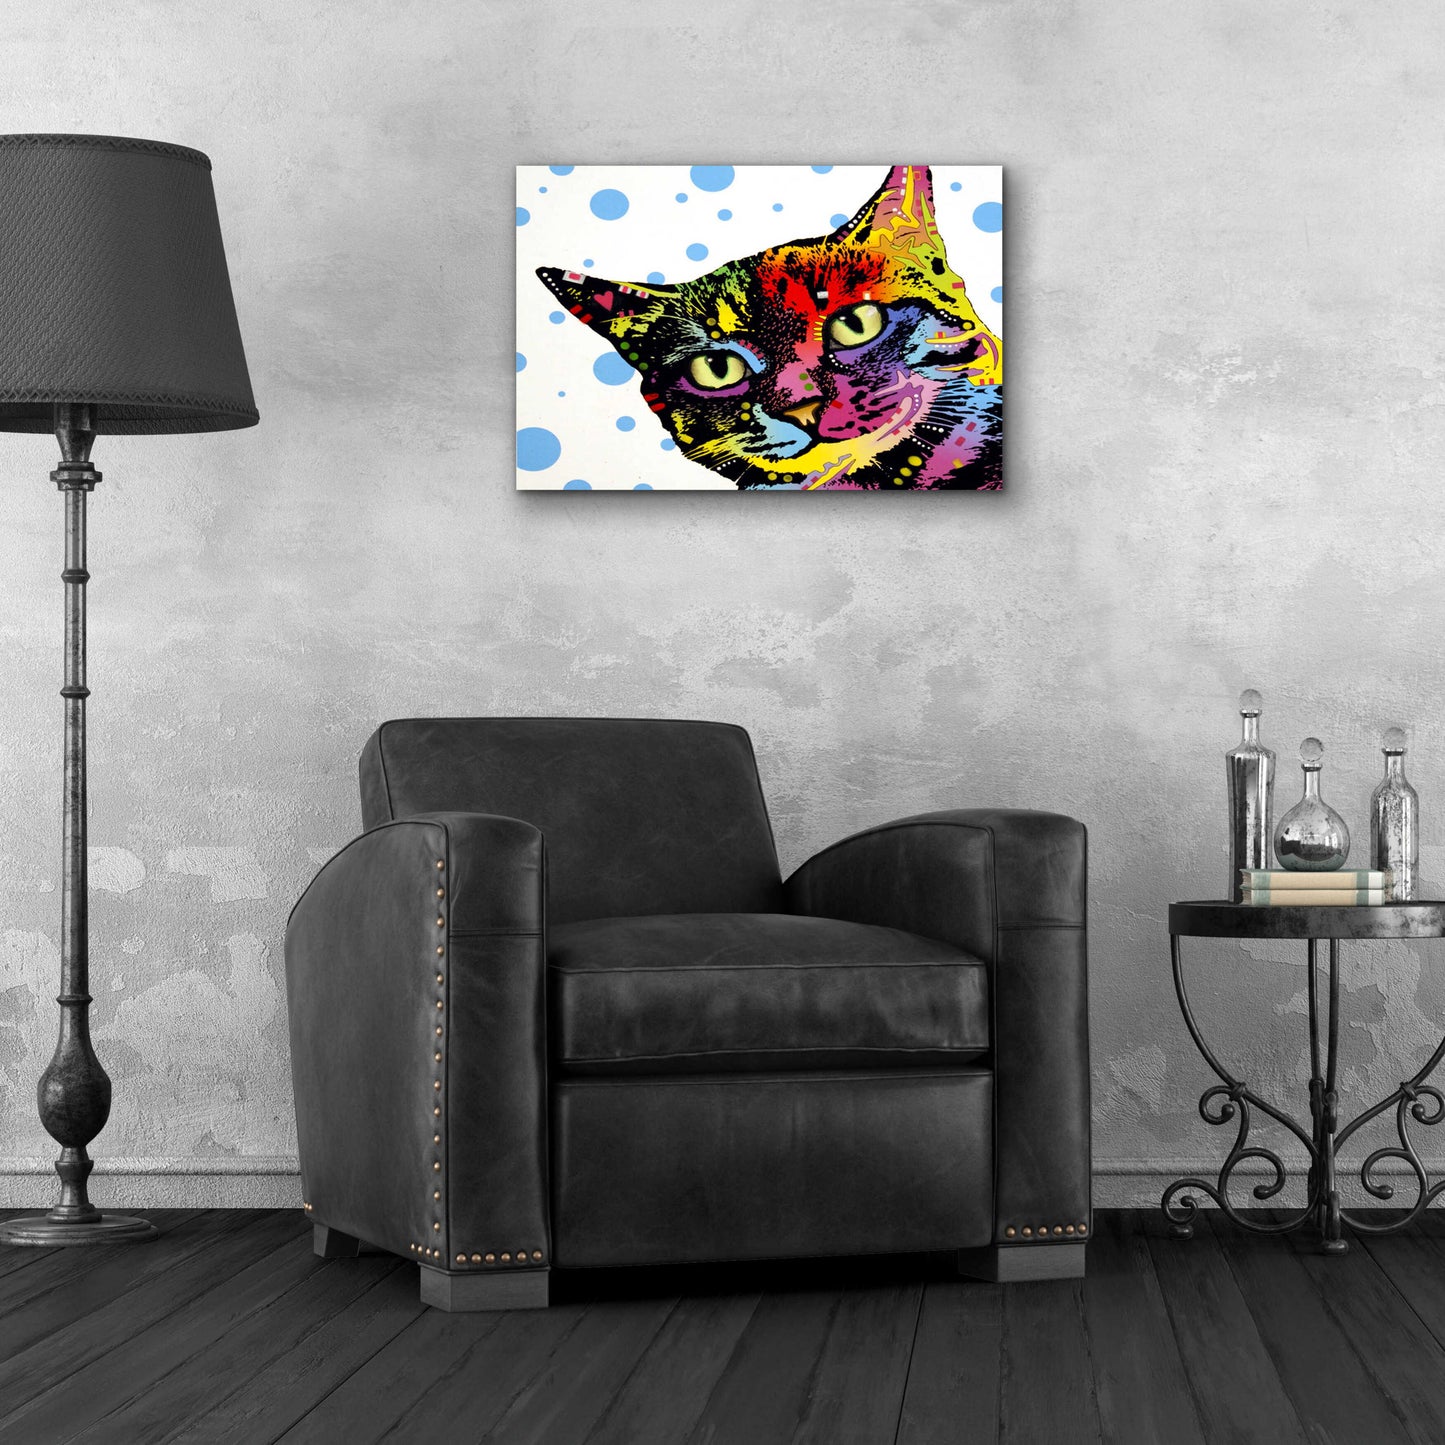 Epic Art 'The Pop Cat' by Dean Russo, Acrylic Glass Wall Art,24x16